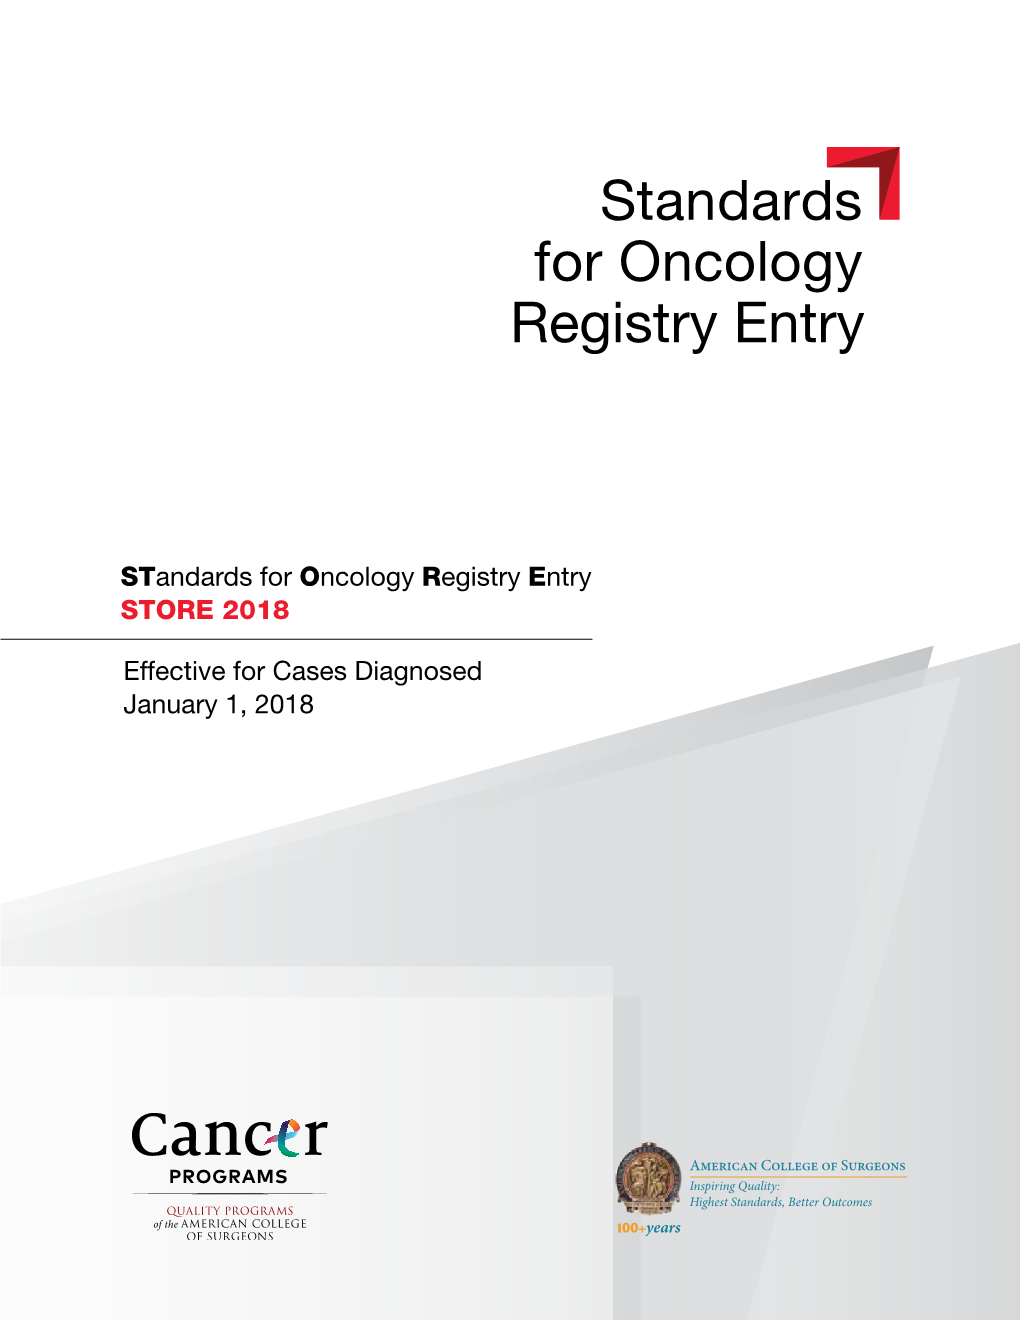 Standards for Oncology Registry Entry (STORE)